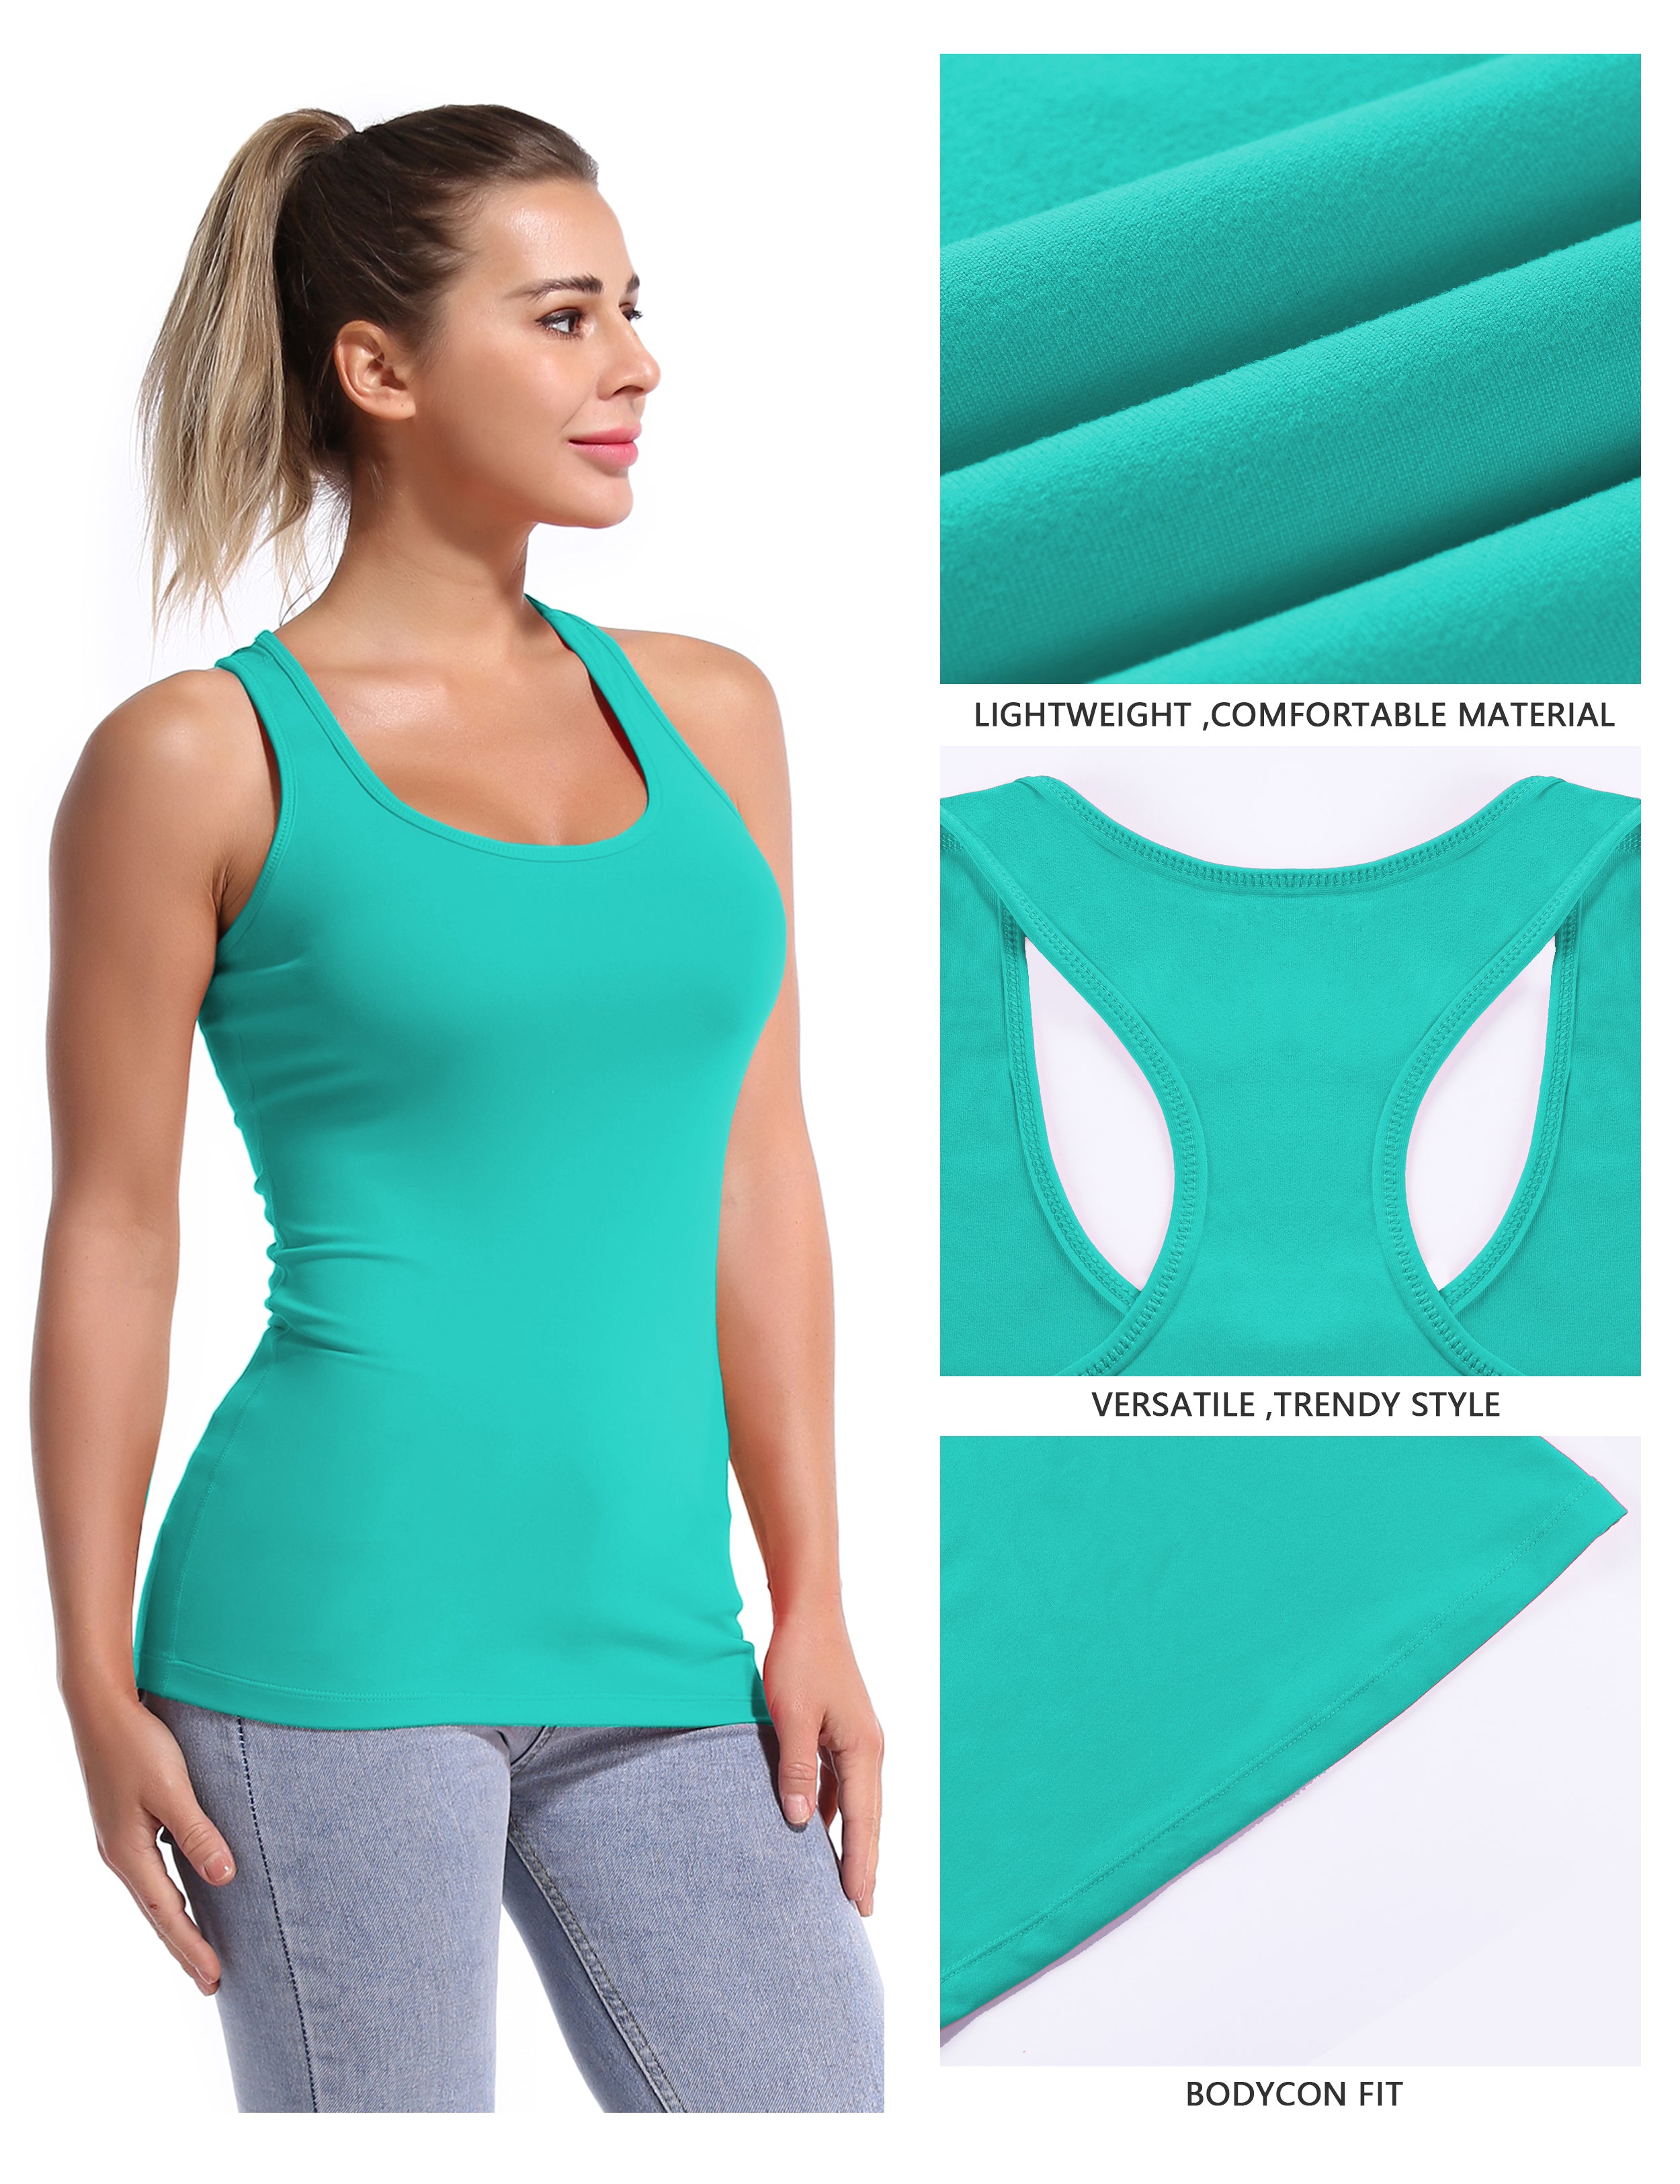 Racerback Athletic Tank Tops cyan 92%Nylon/8%Spandex(Cotton Soft) Designed for Yoga Tight Fit So buttery soft, it feels weightless Sweat-wicking Four-way stretch Breathable Contours your body Sits below the waistband for moderate, everyday coverage